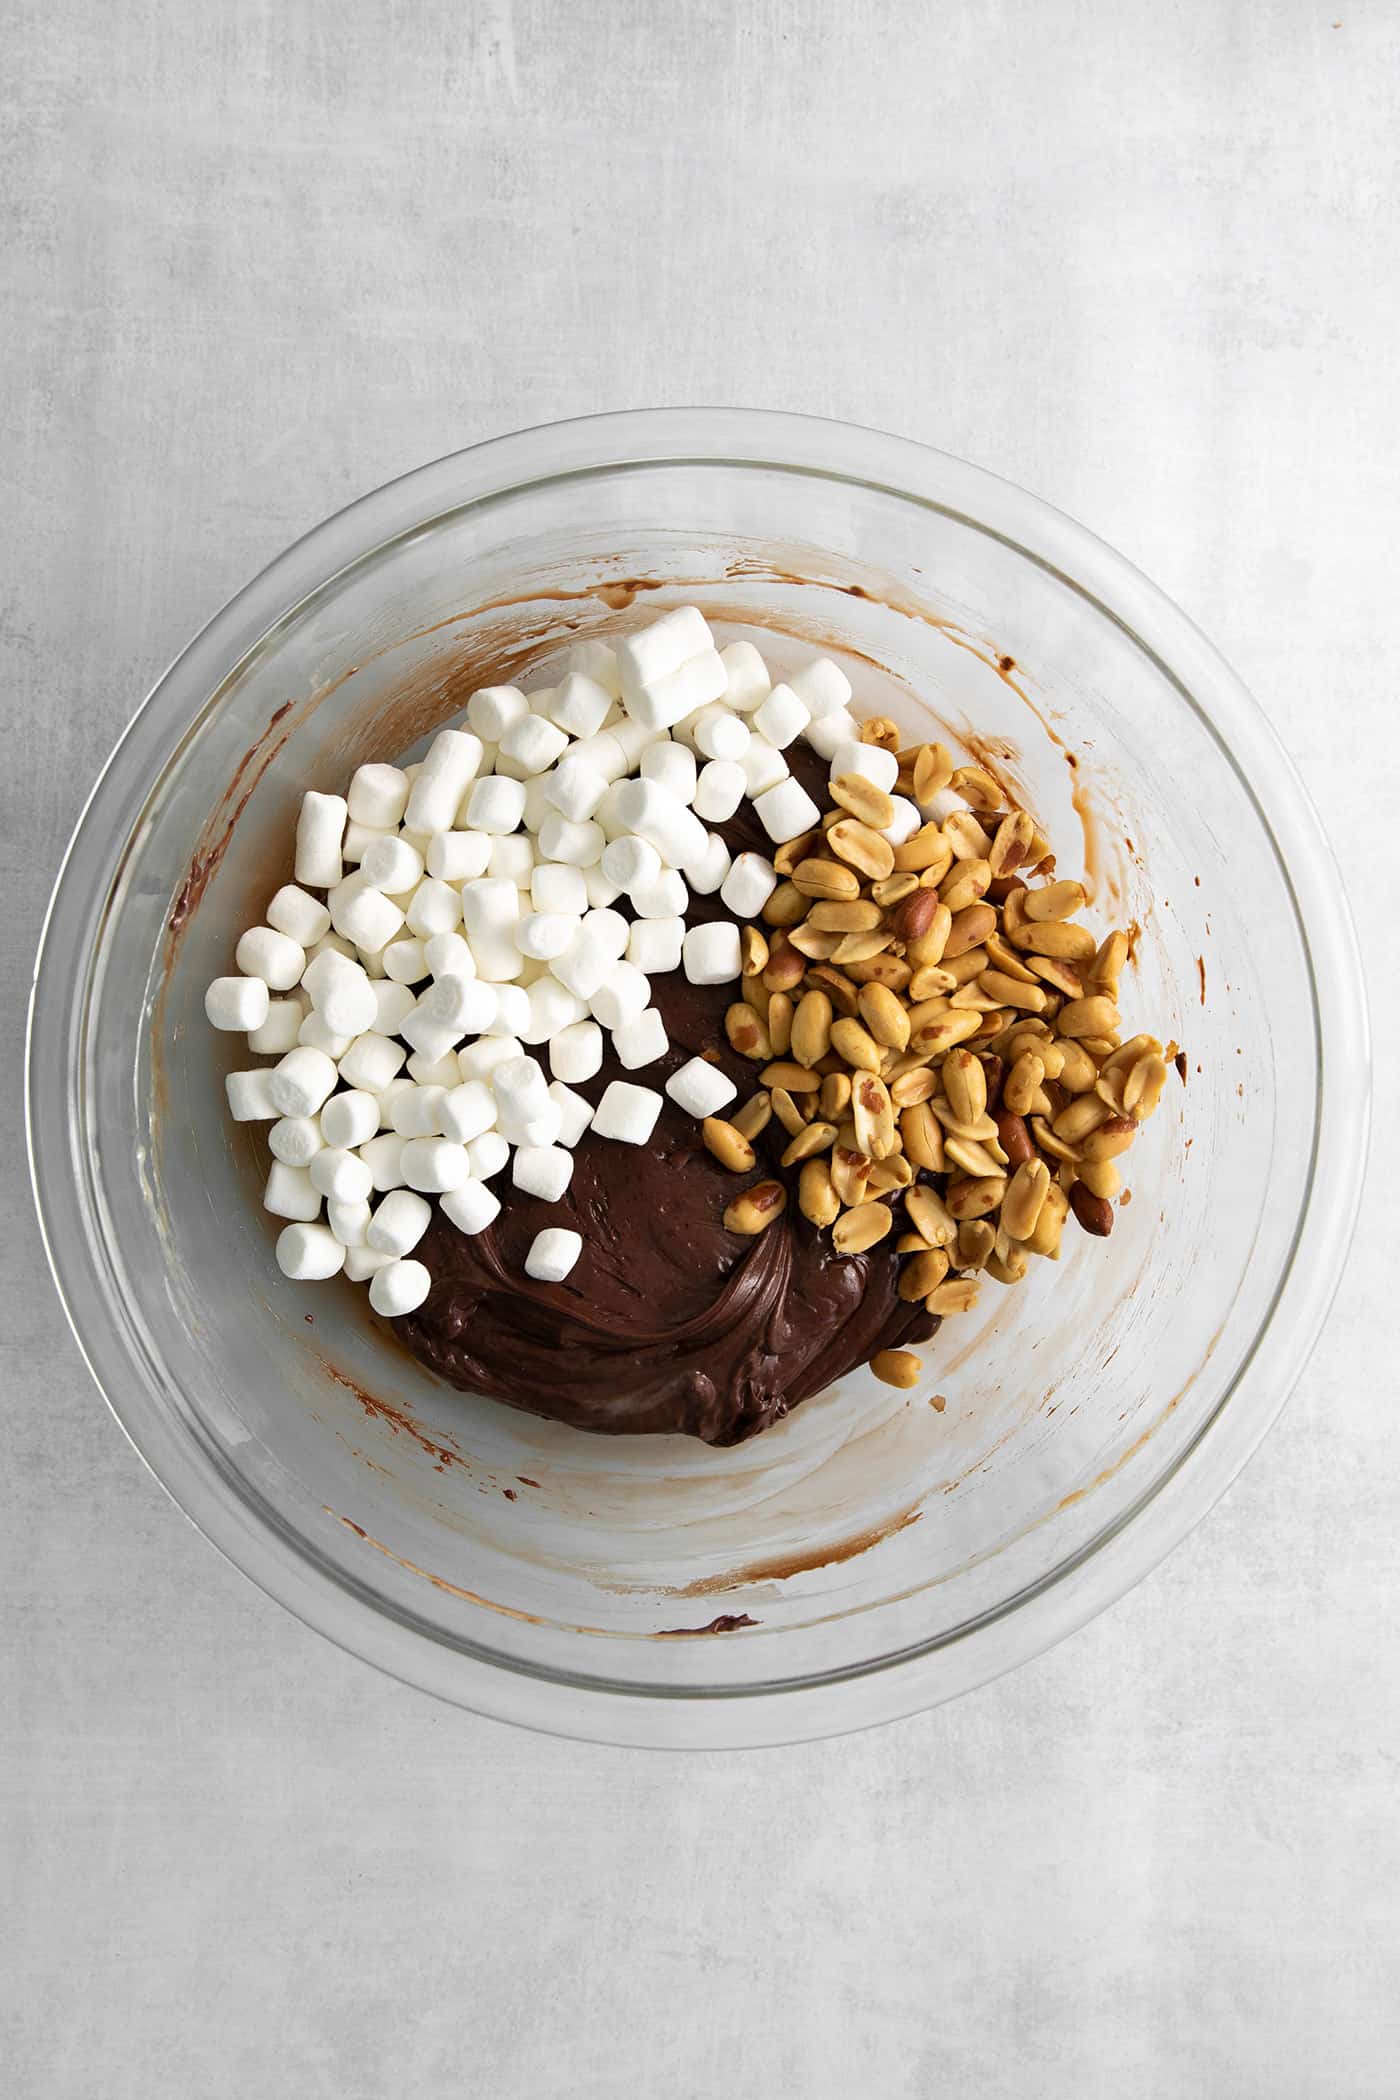 Marshmallows, peanuts, and melted chocolate in a bowl